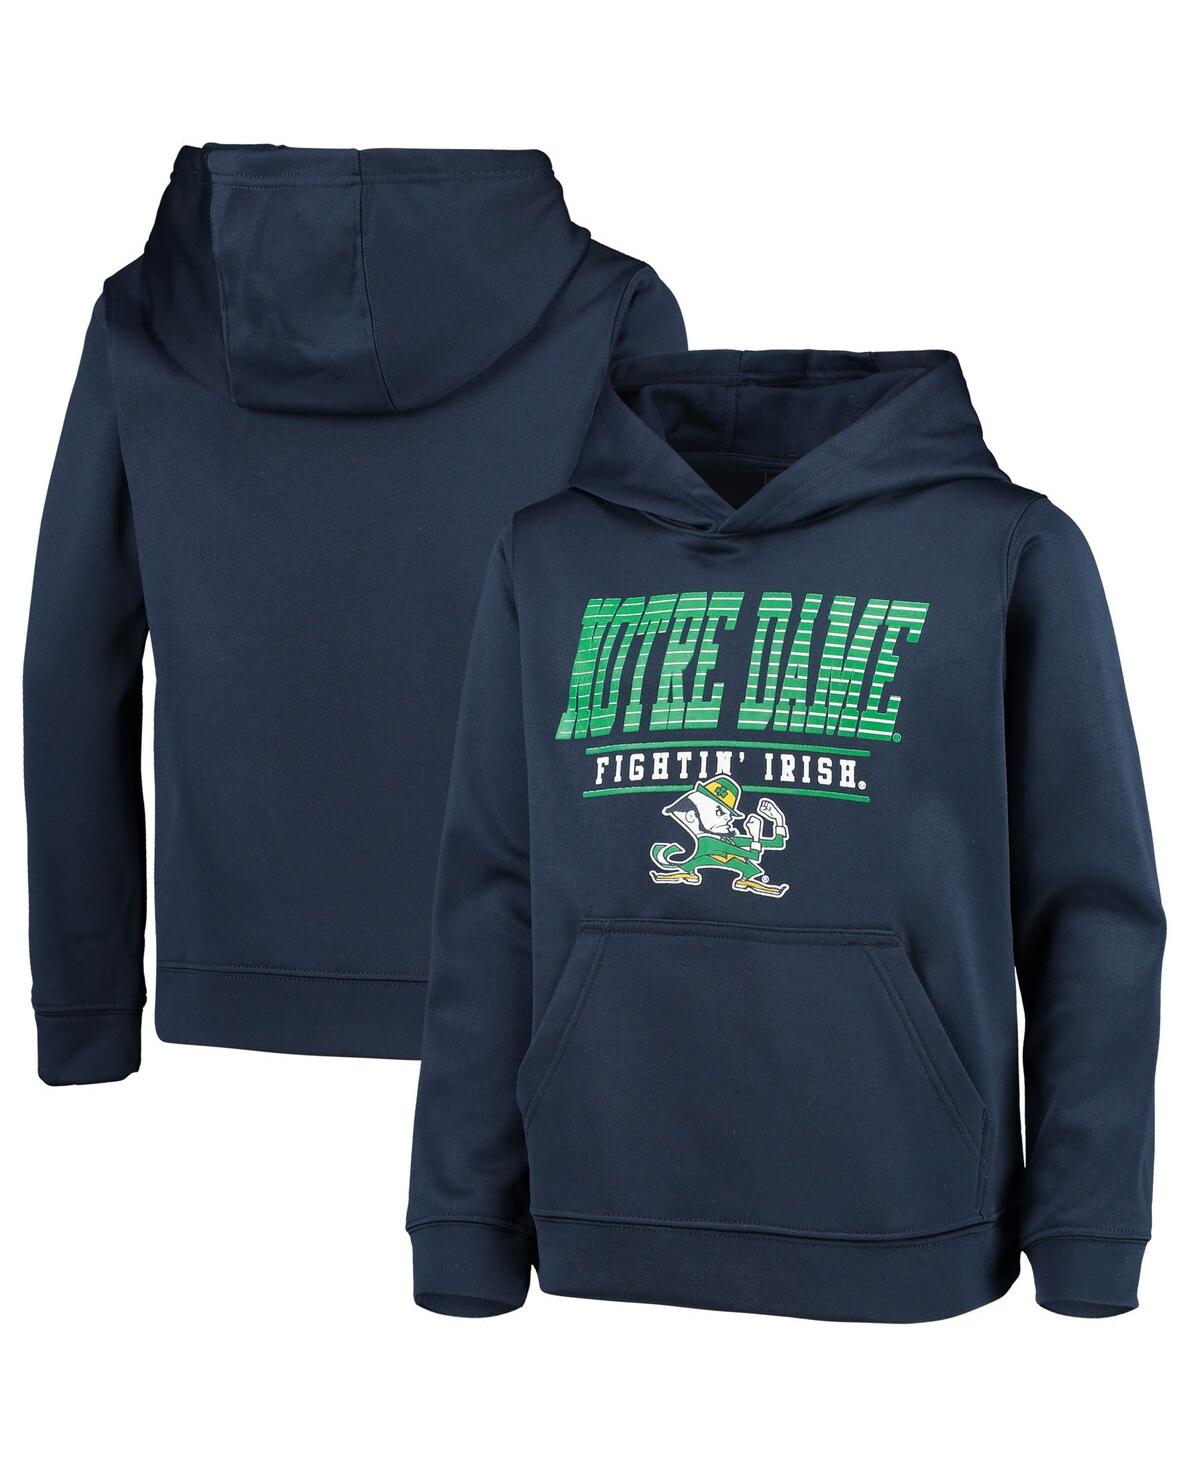 Outerstuff Kids' Big Boys And Girls Navy Notre Dame Fighting Irish Fast Pullover Hoodie